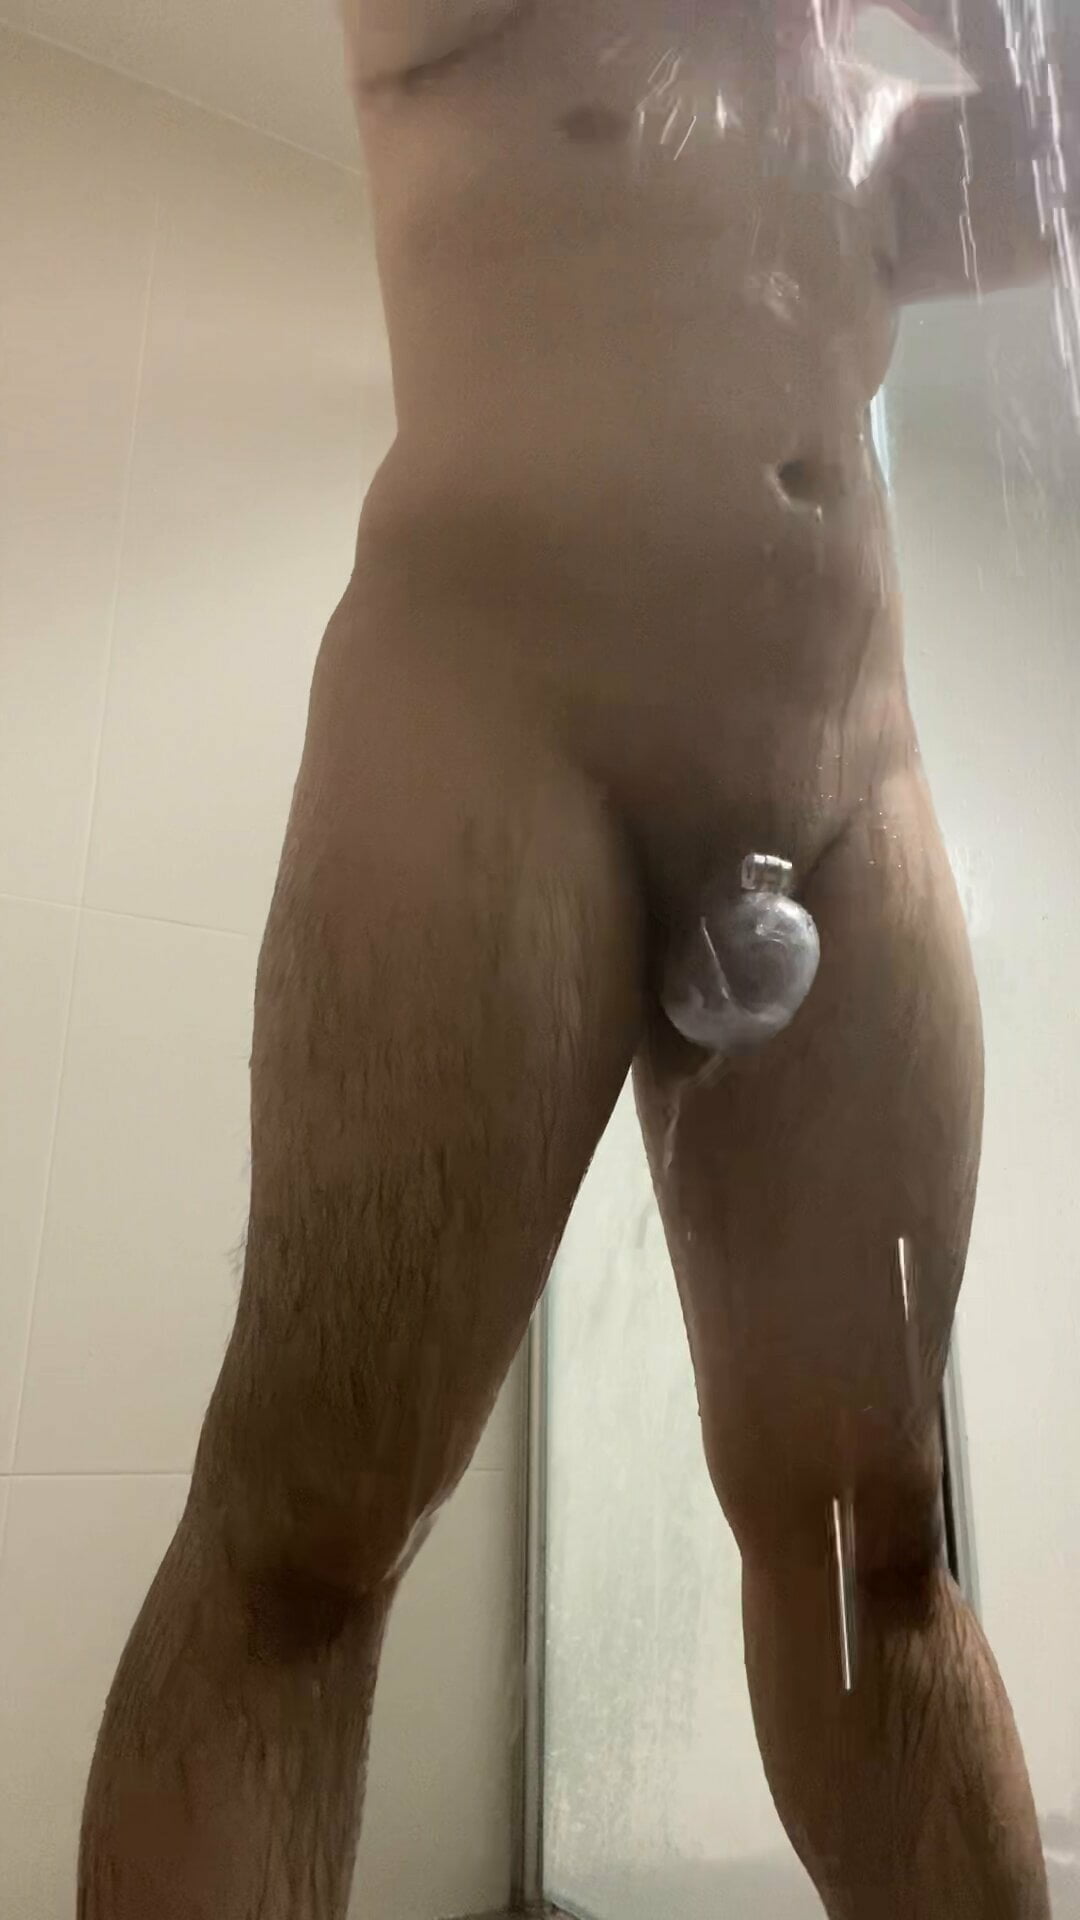 Chasity caged Korean chubby boy taking shower